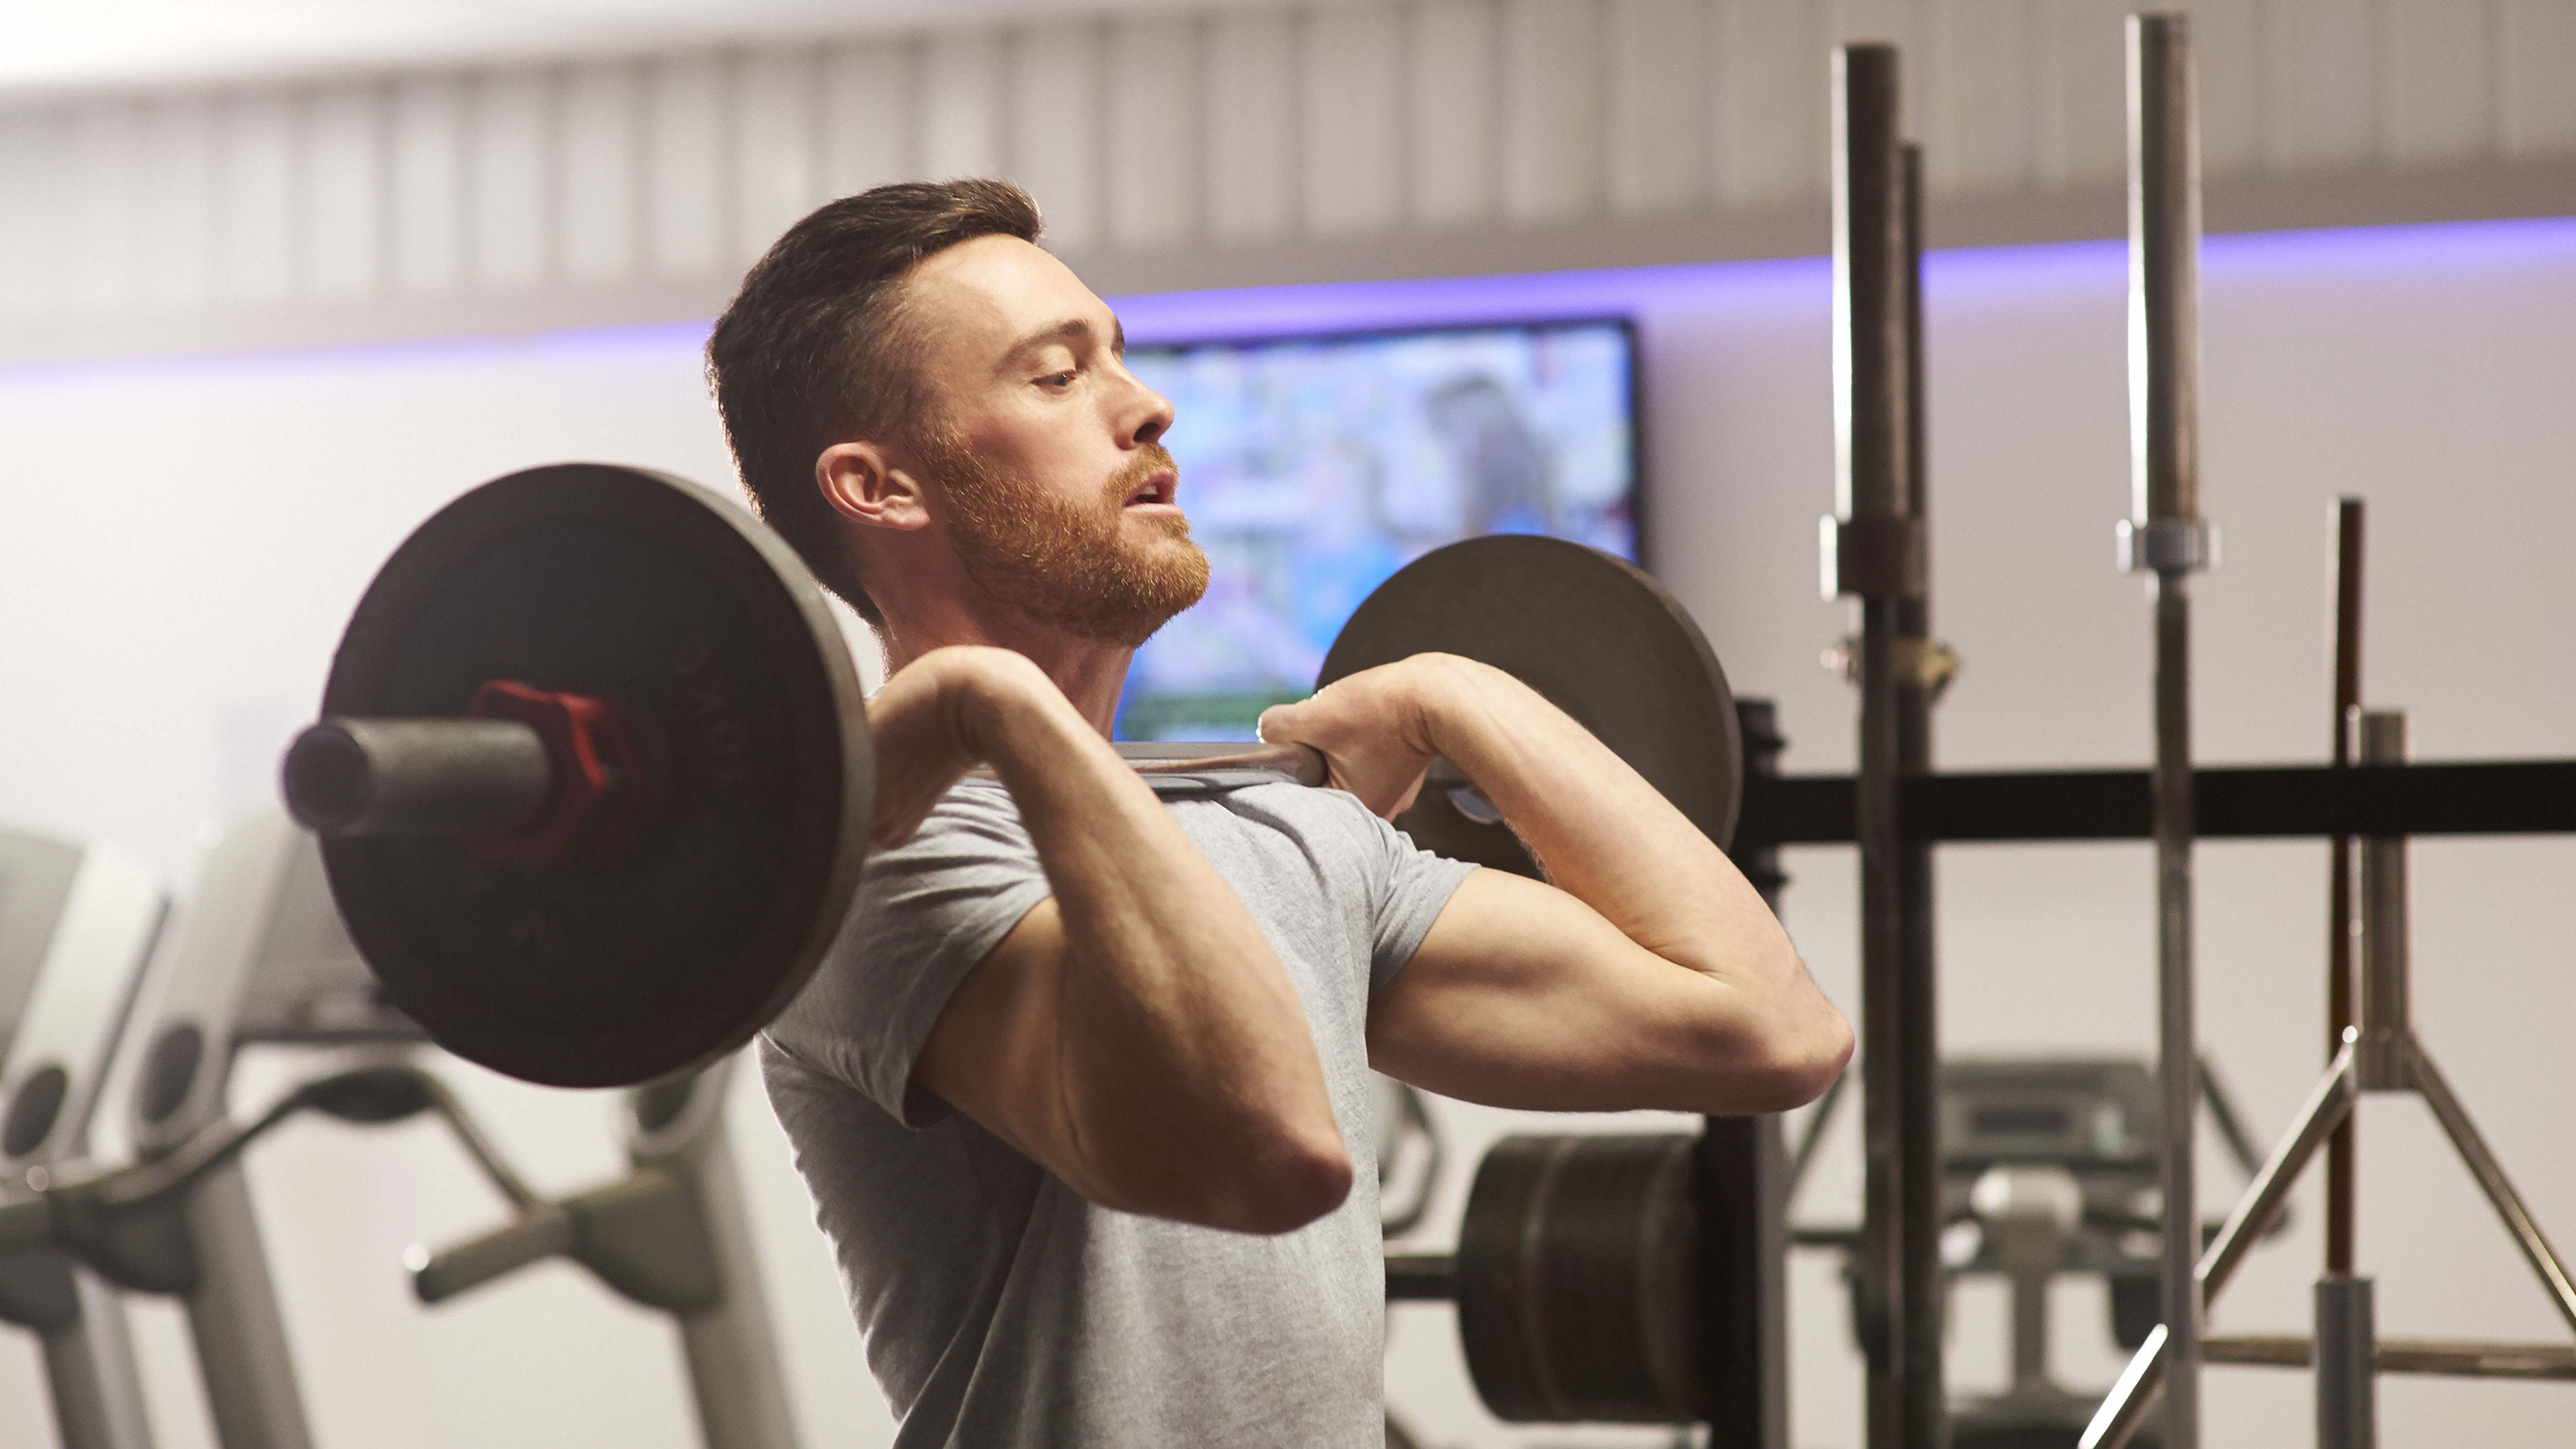 The 12-Week Plan to Throw on Muscle Mass - Muscle & Fitness